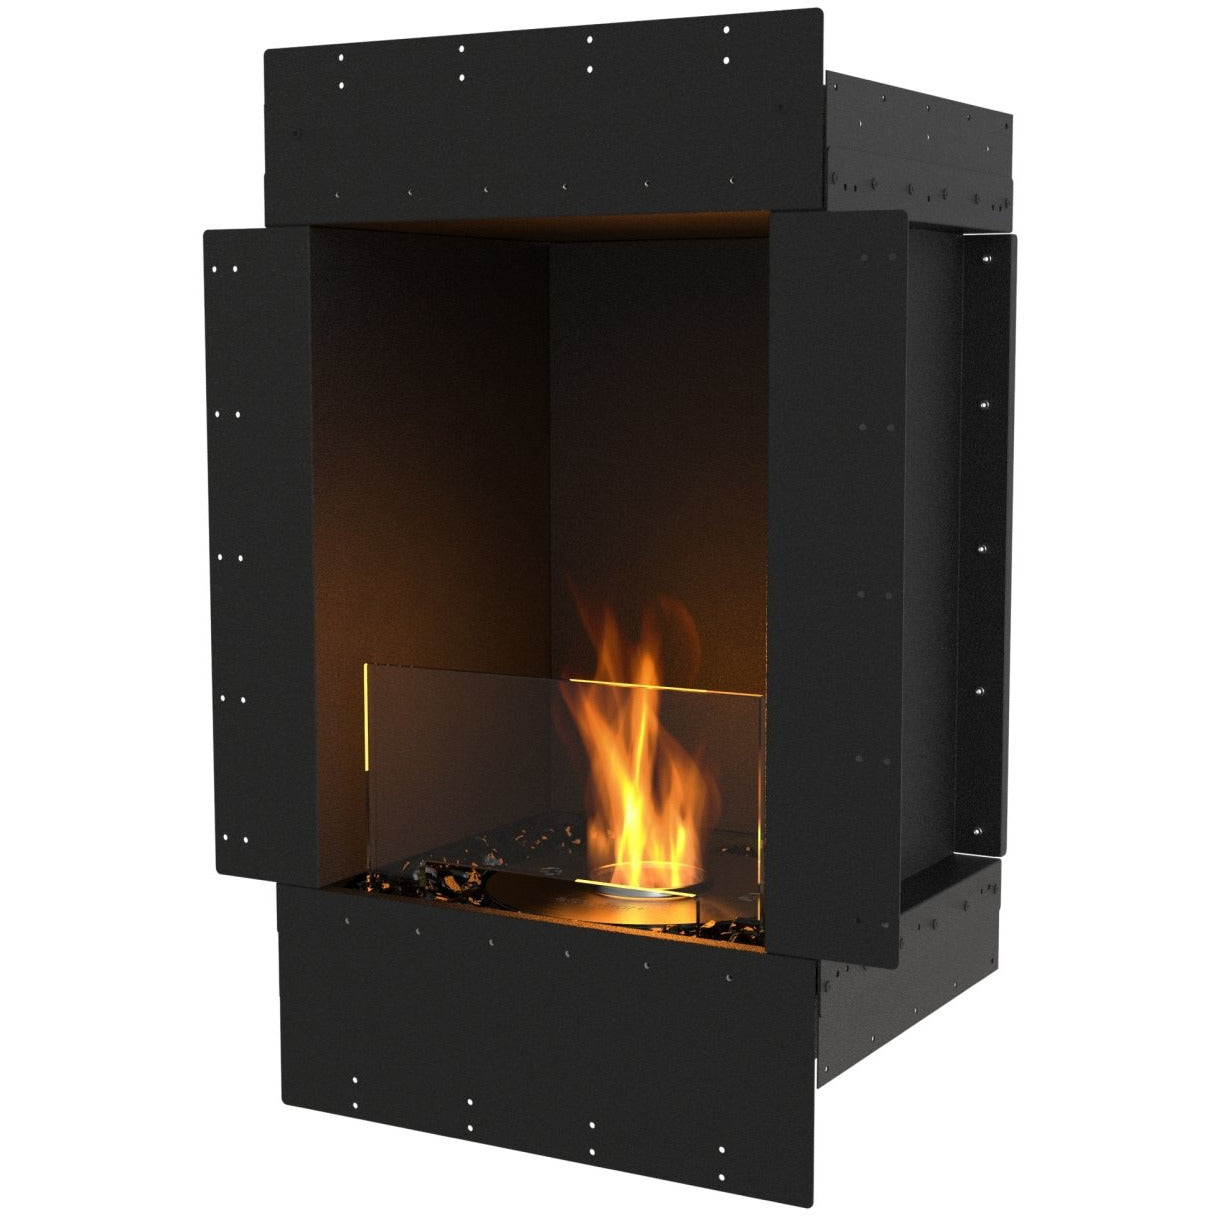 EcoSmart Flex 18SS Best Bioethanol Fireplace in Black -  22.8 inches wall fireplace for sale